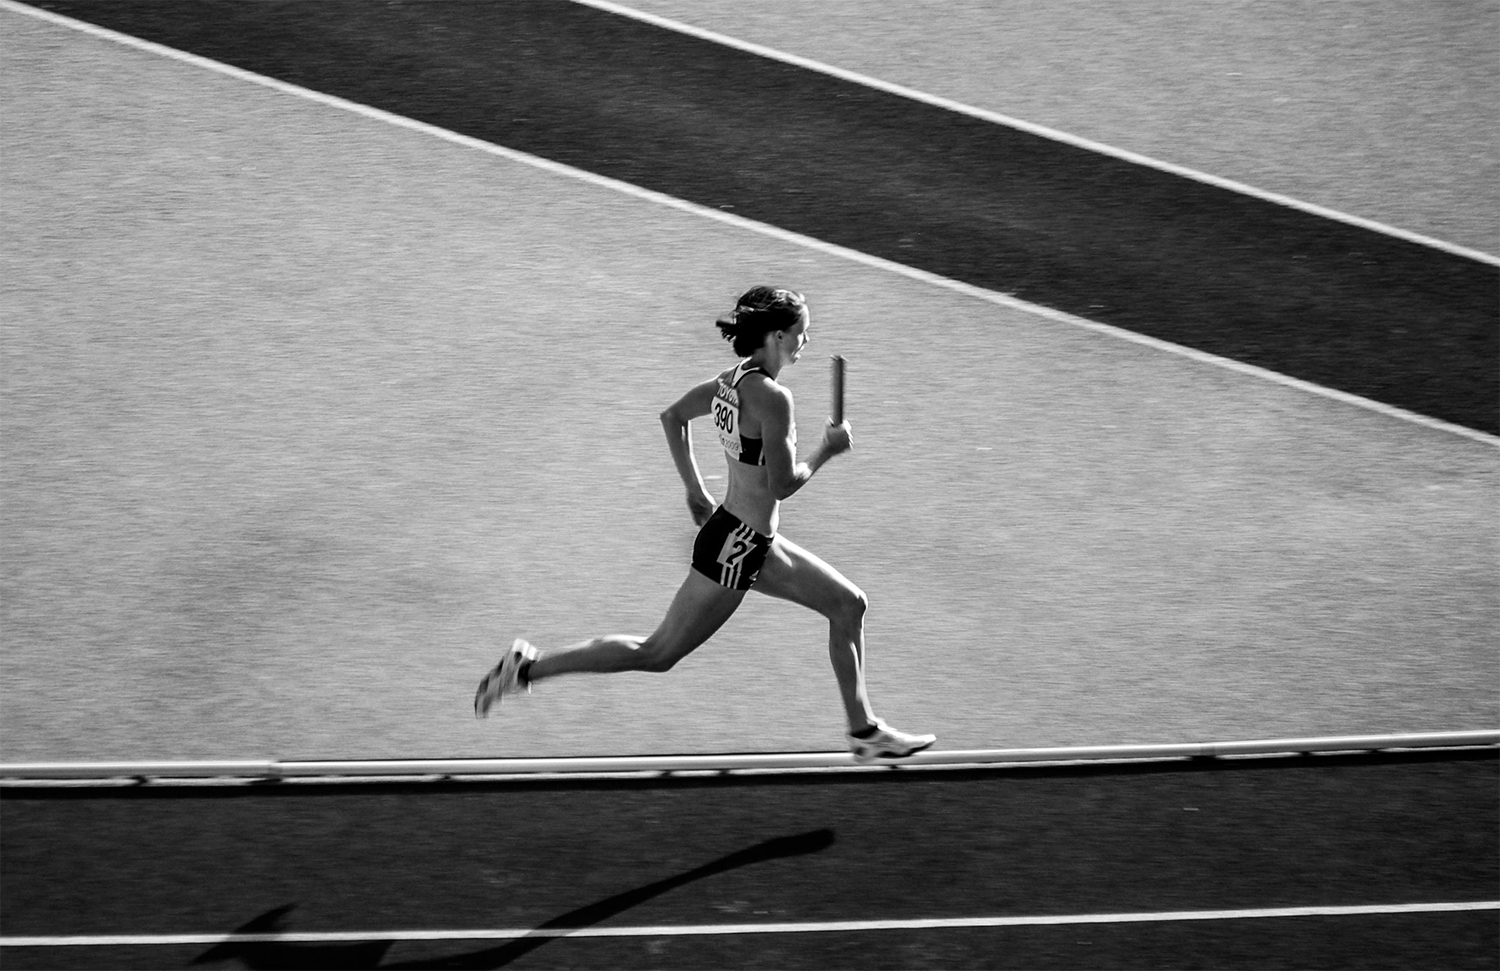 <p>Britain's Nicola Sanders runs the anchor leg of the women's 4x400m final at the 12th IAAF World Championships, at Berlin's Olympiastadion. Initially finishing fourth, the British team was later upgraded to bronze after the Russians were disqualified for doping.<br /></p>
